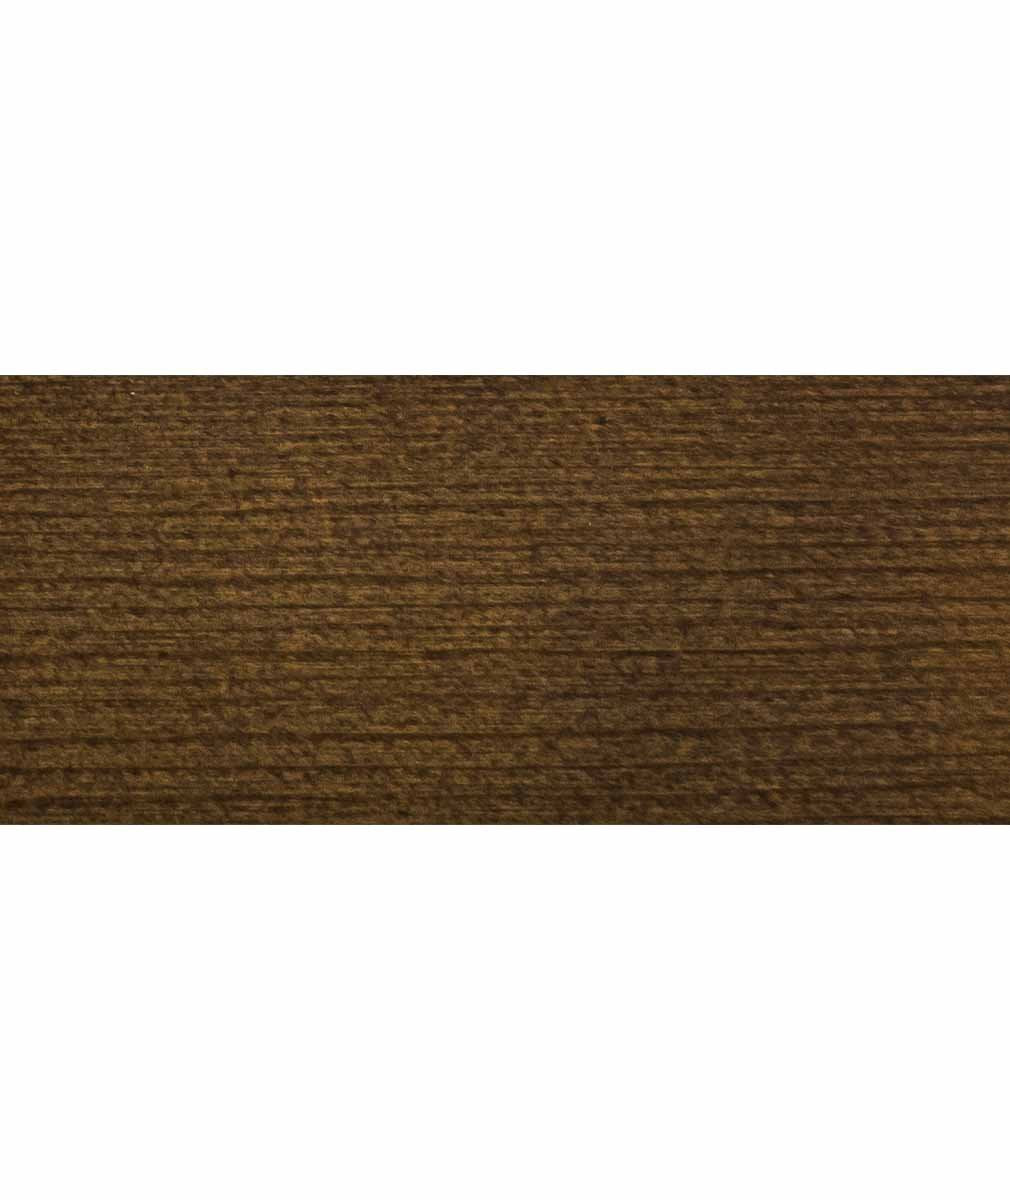 General Finishes Wood Stain - Oil Based - Spiced Walnut - Quart